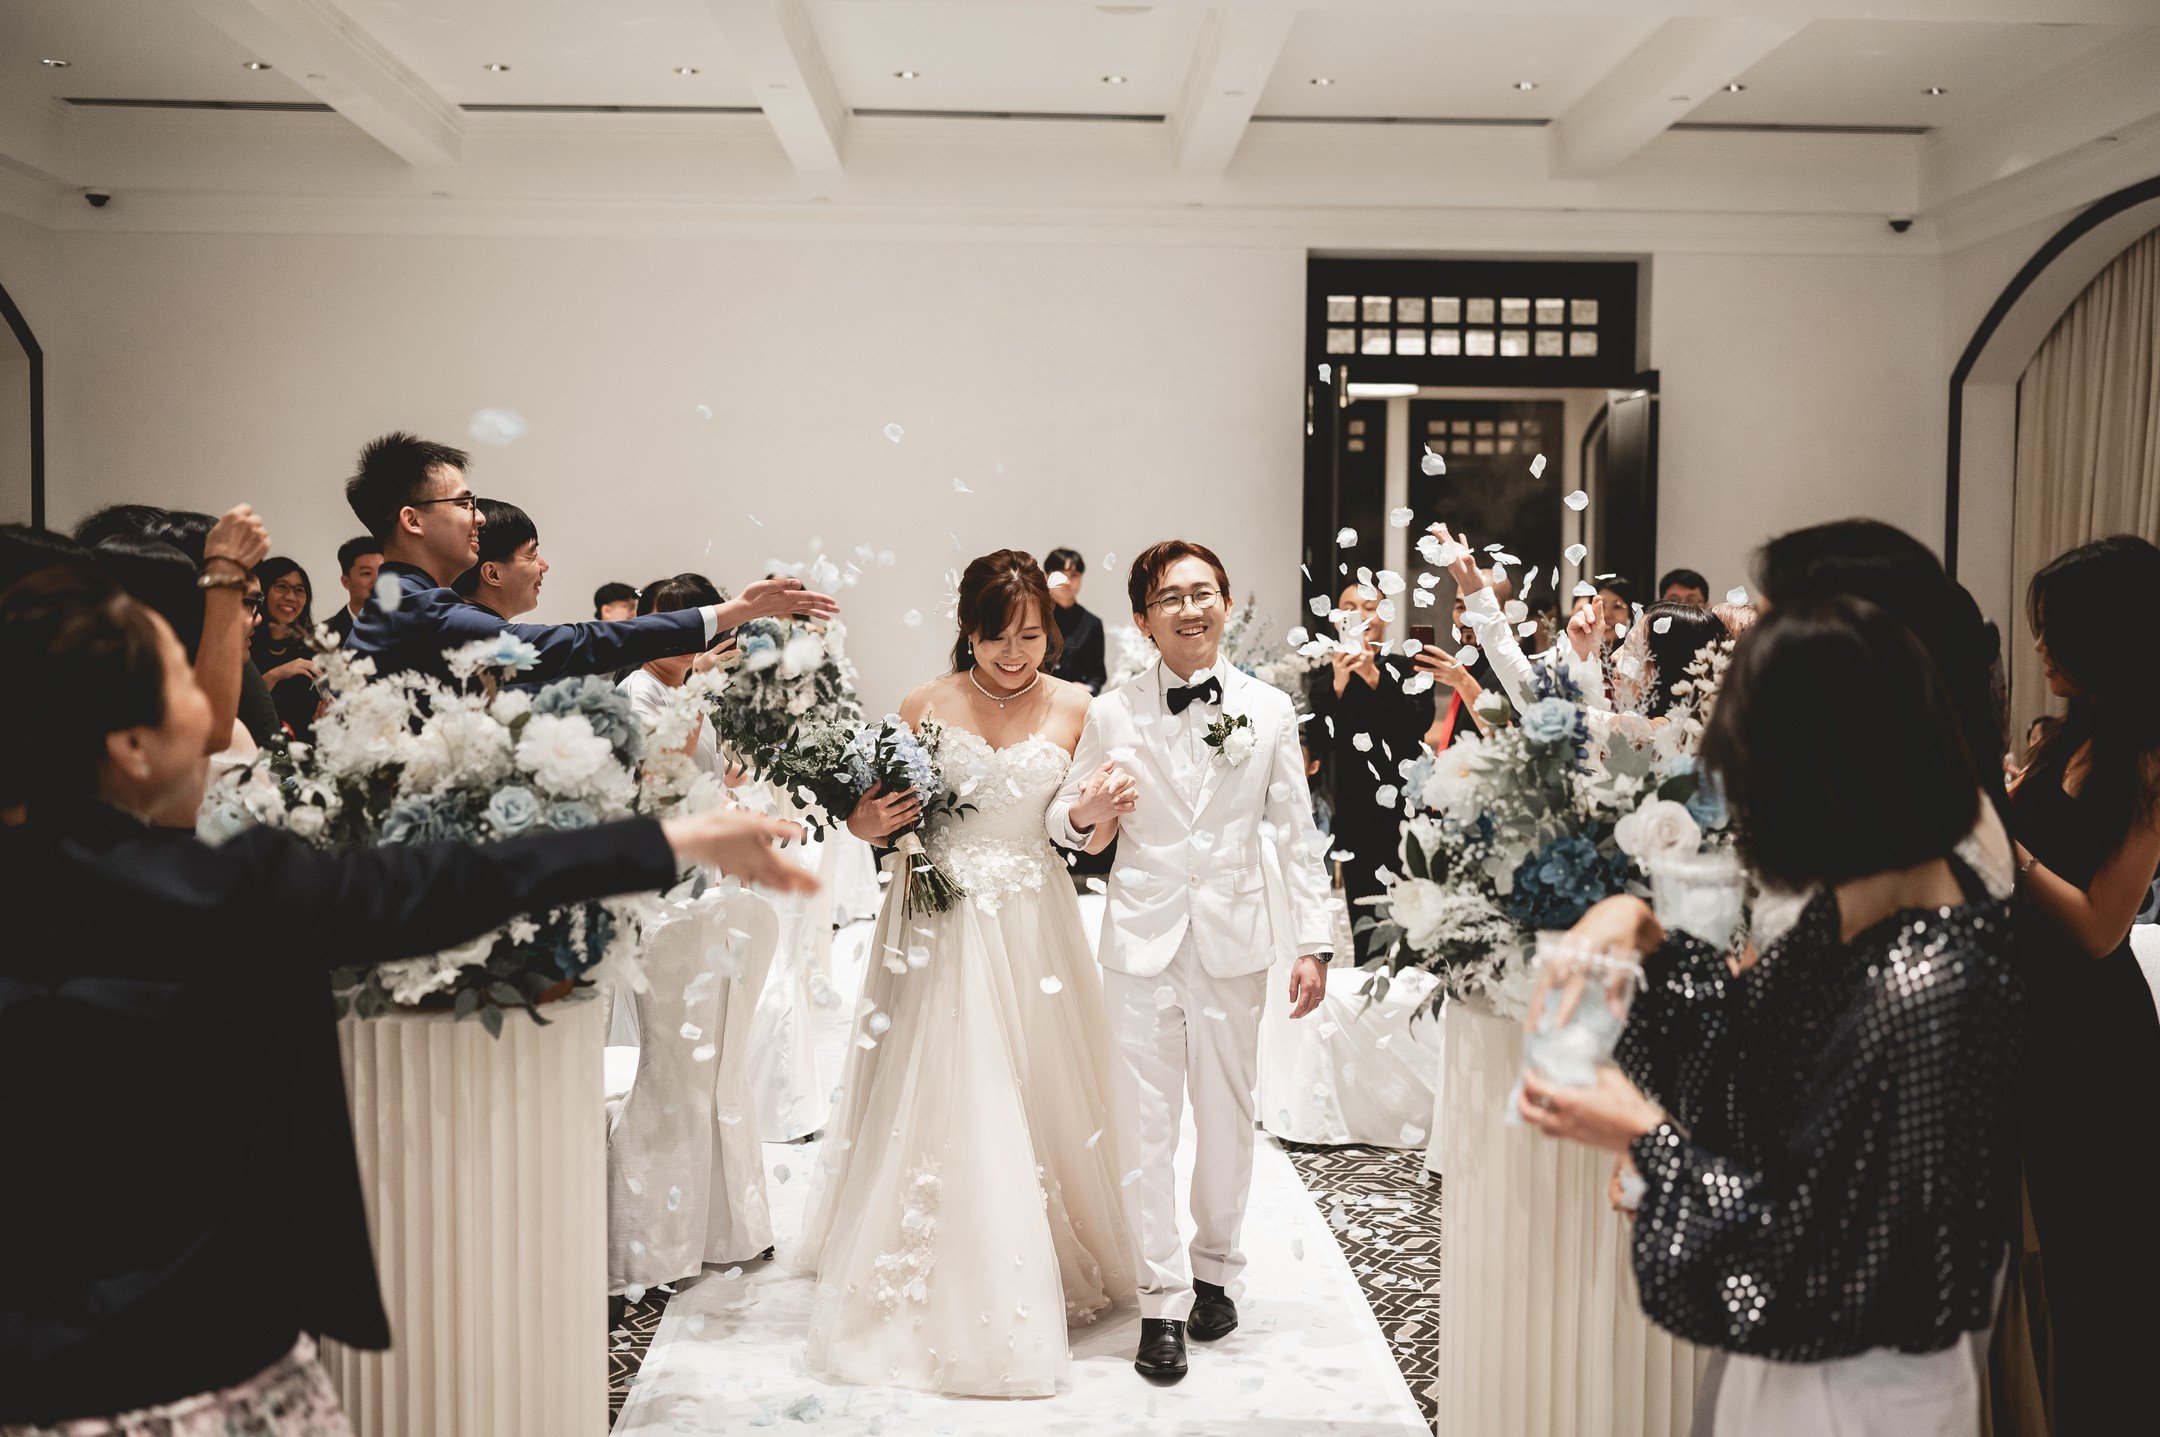 Cerebrating Dale&amp;Christie Wedding

Photo : Arsh @luvpersecond
Make Up @arieltistry @carchan.makeup 
For enquiry, contact us at +65 83990229
mail@luvpersecond.com
#singaporewedding #weddingphotography #sgwedding #singaporeprewedding #singaporewedd